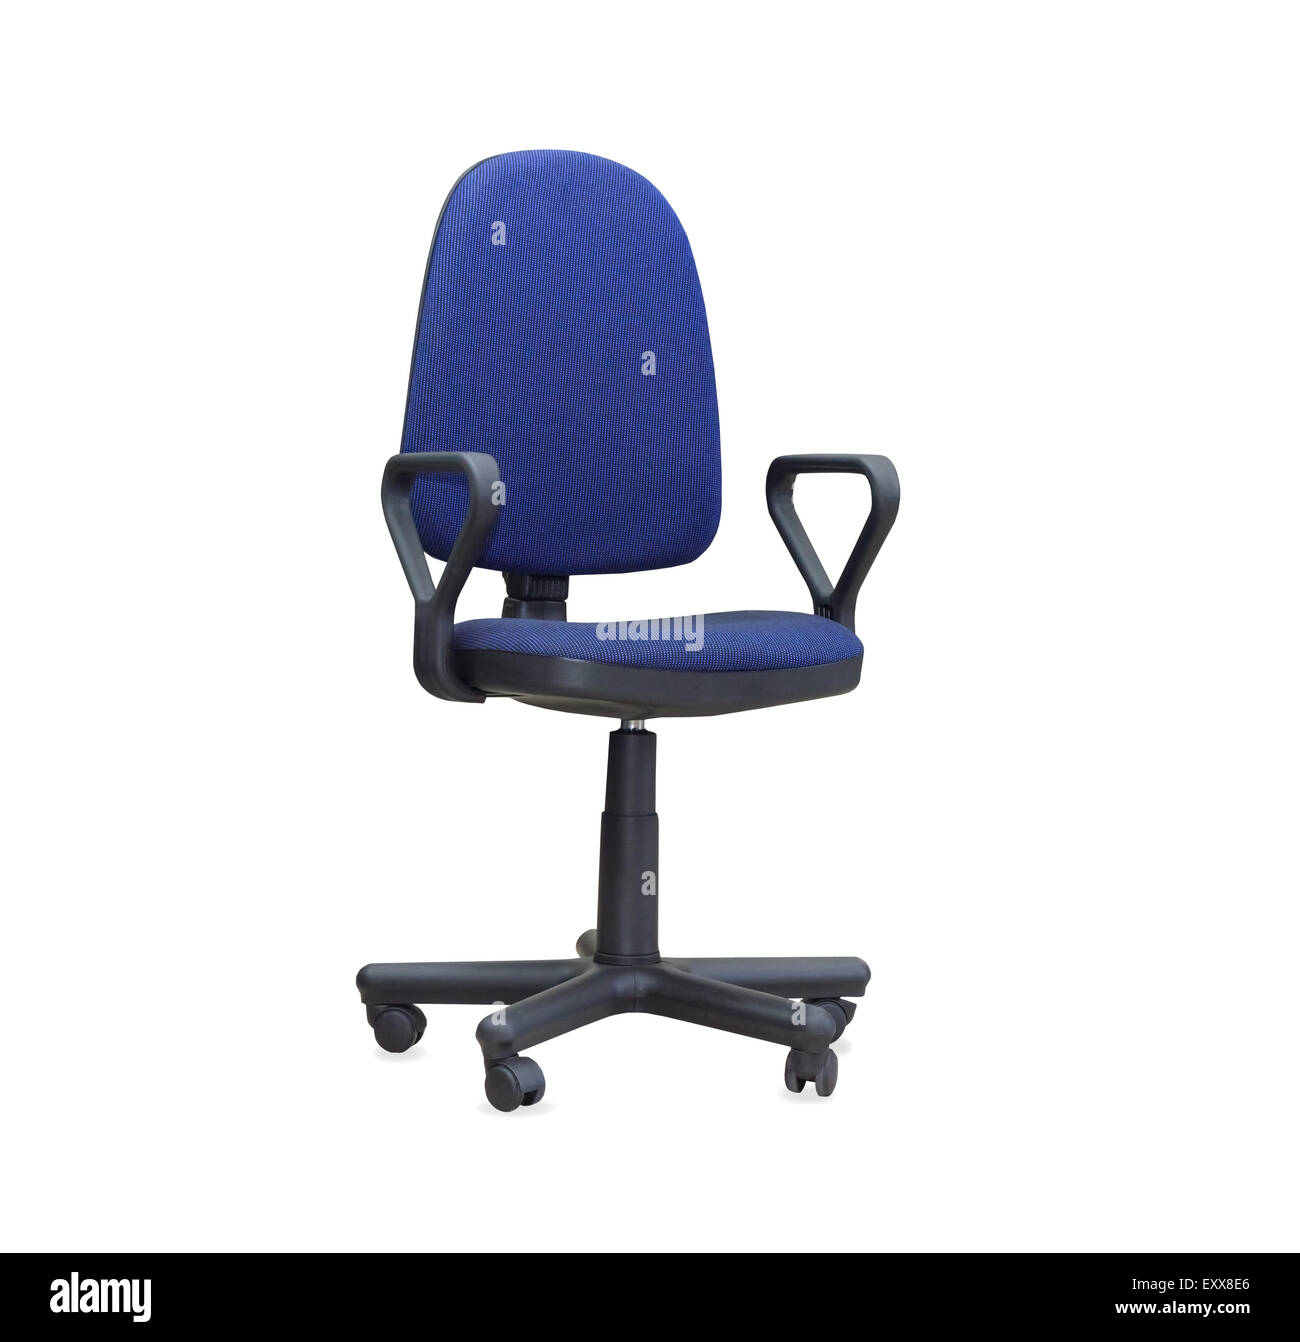 The blue office chair. Isolated Stock Photo